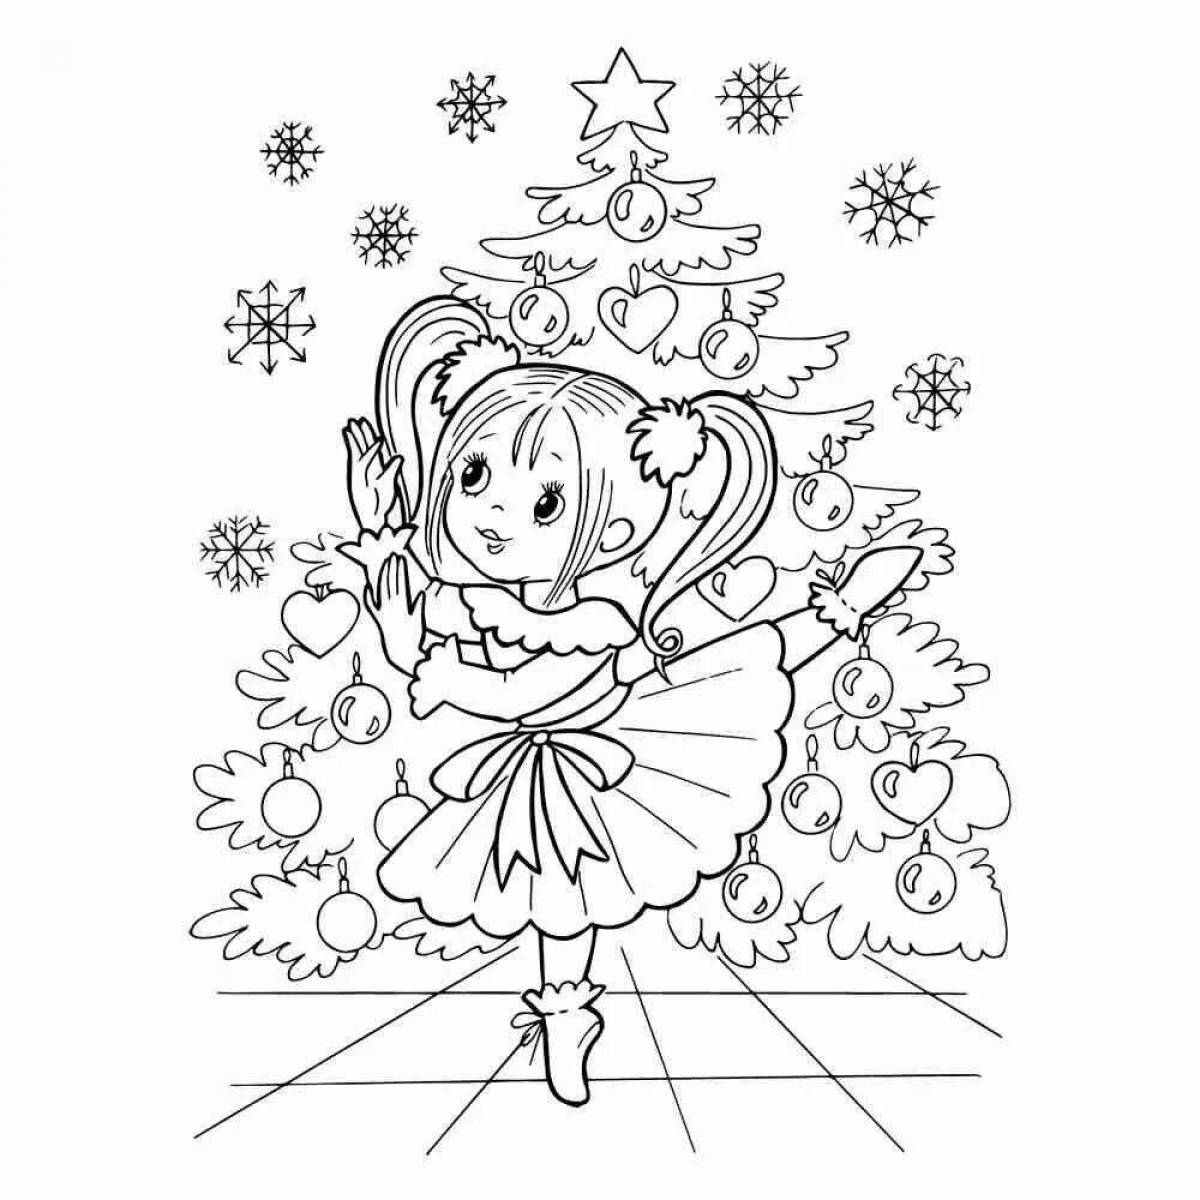 Bright children's Christmas coloring book